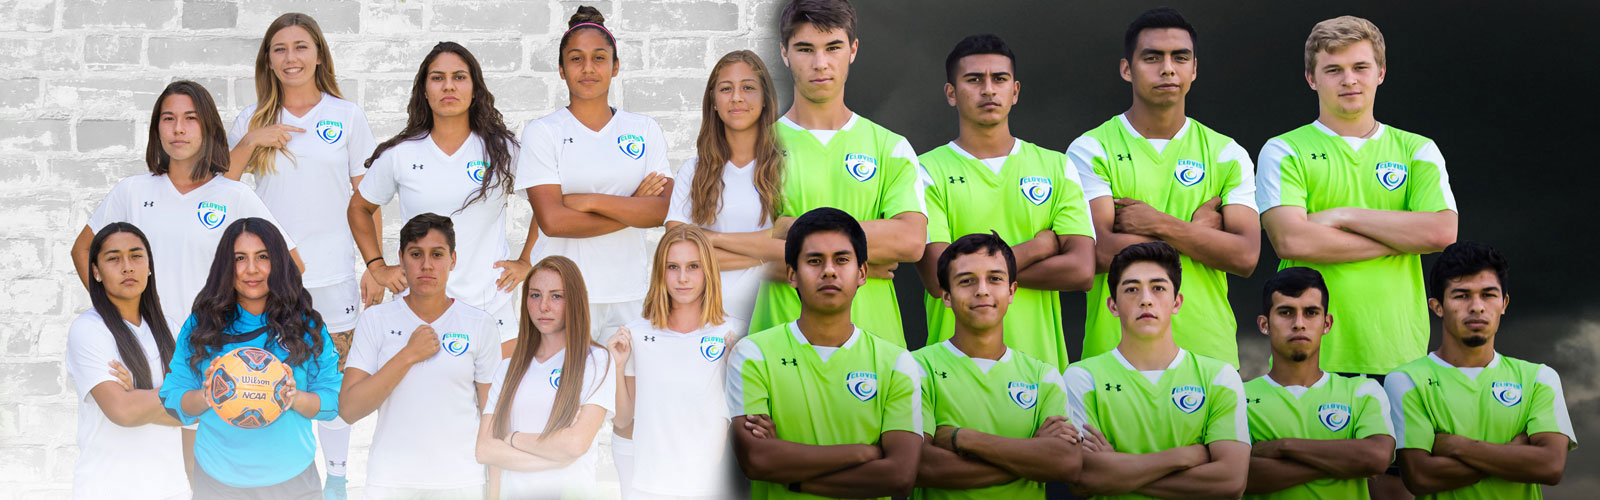 collage of boys and girls team photos